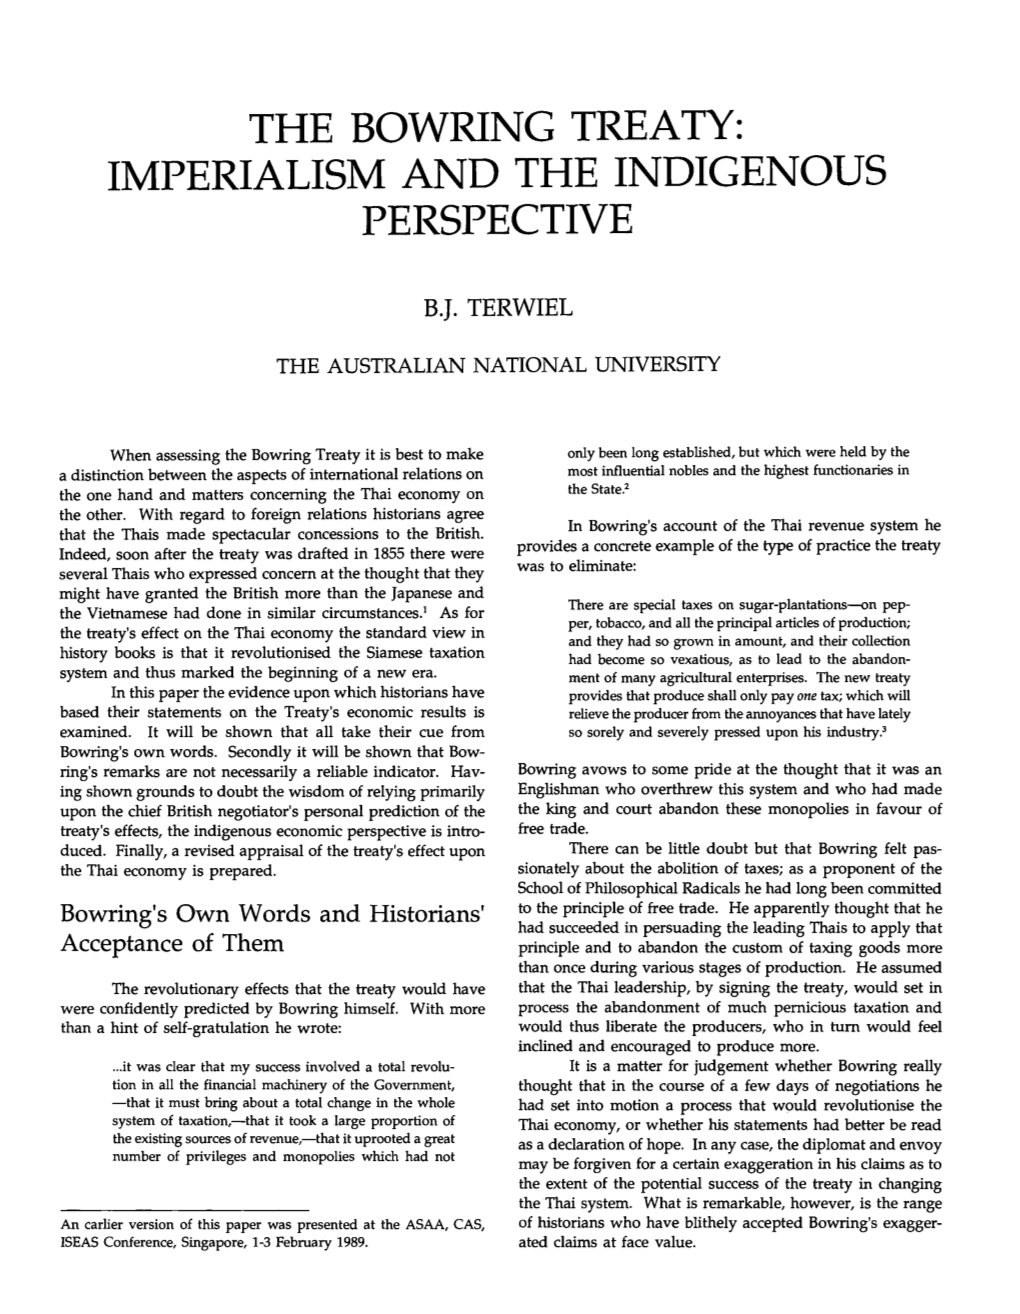 The Bowring Treaty: Imperialism and the Indigenous Perspective